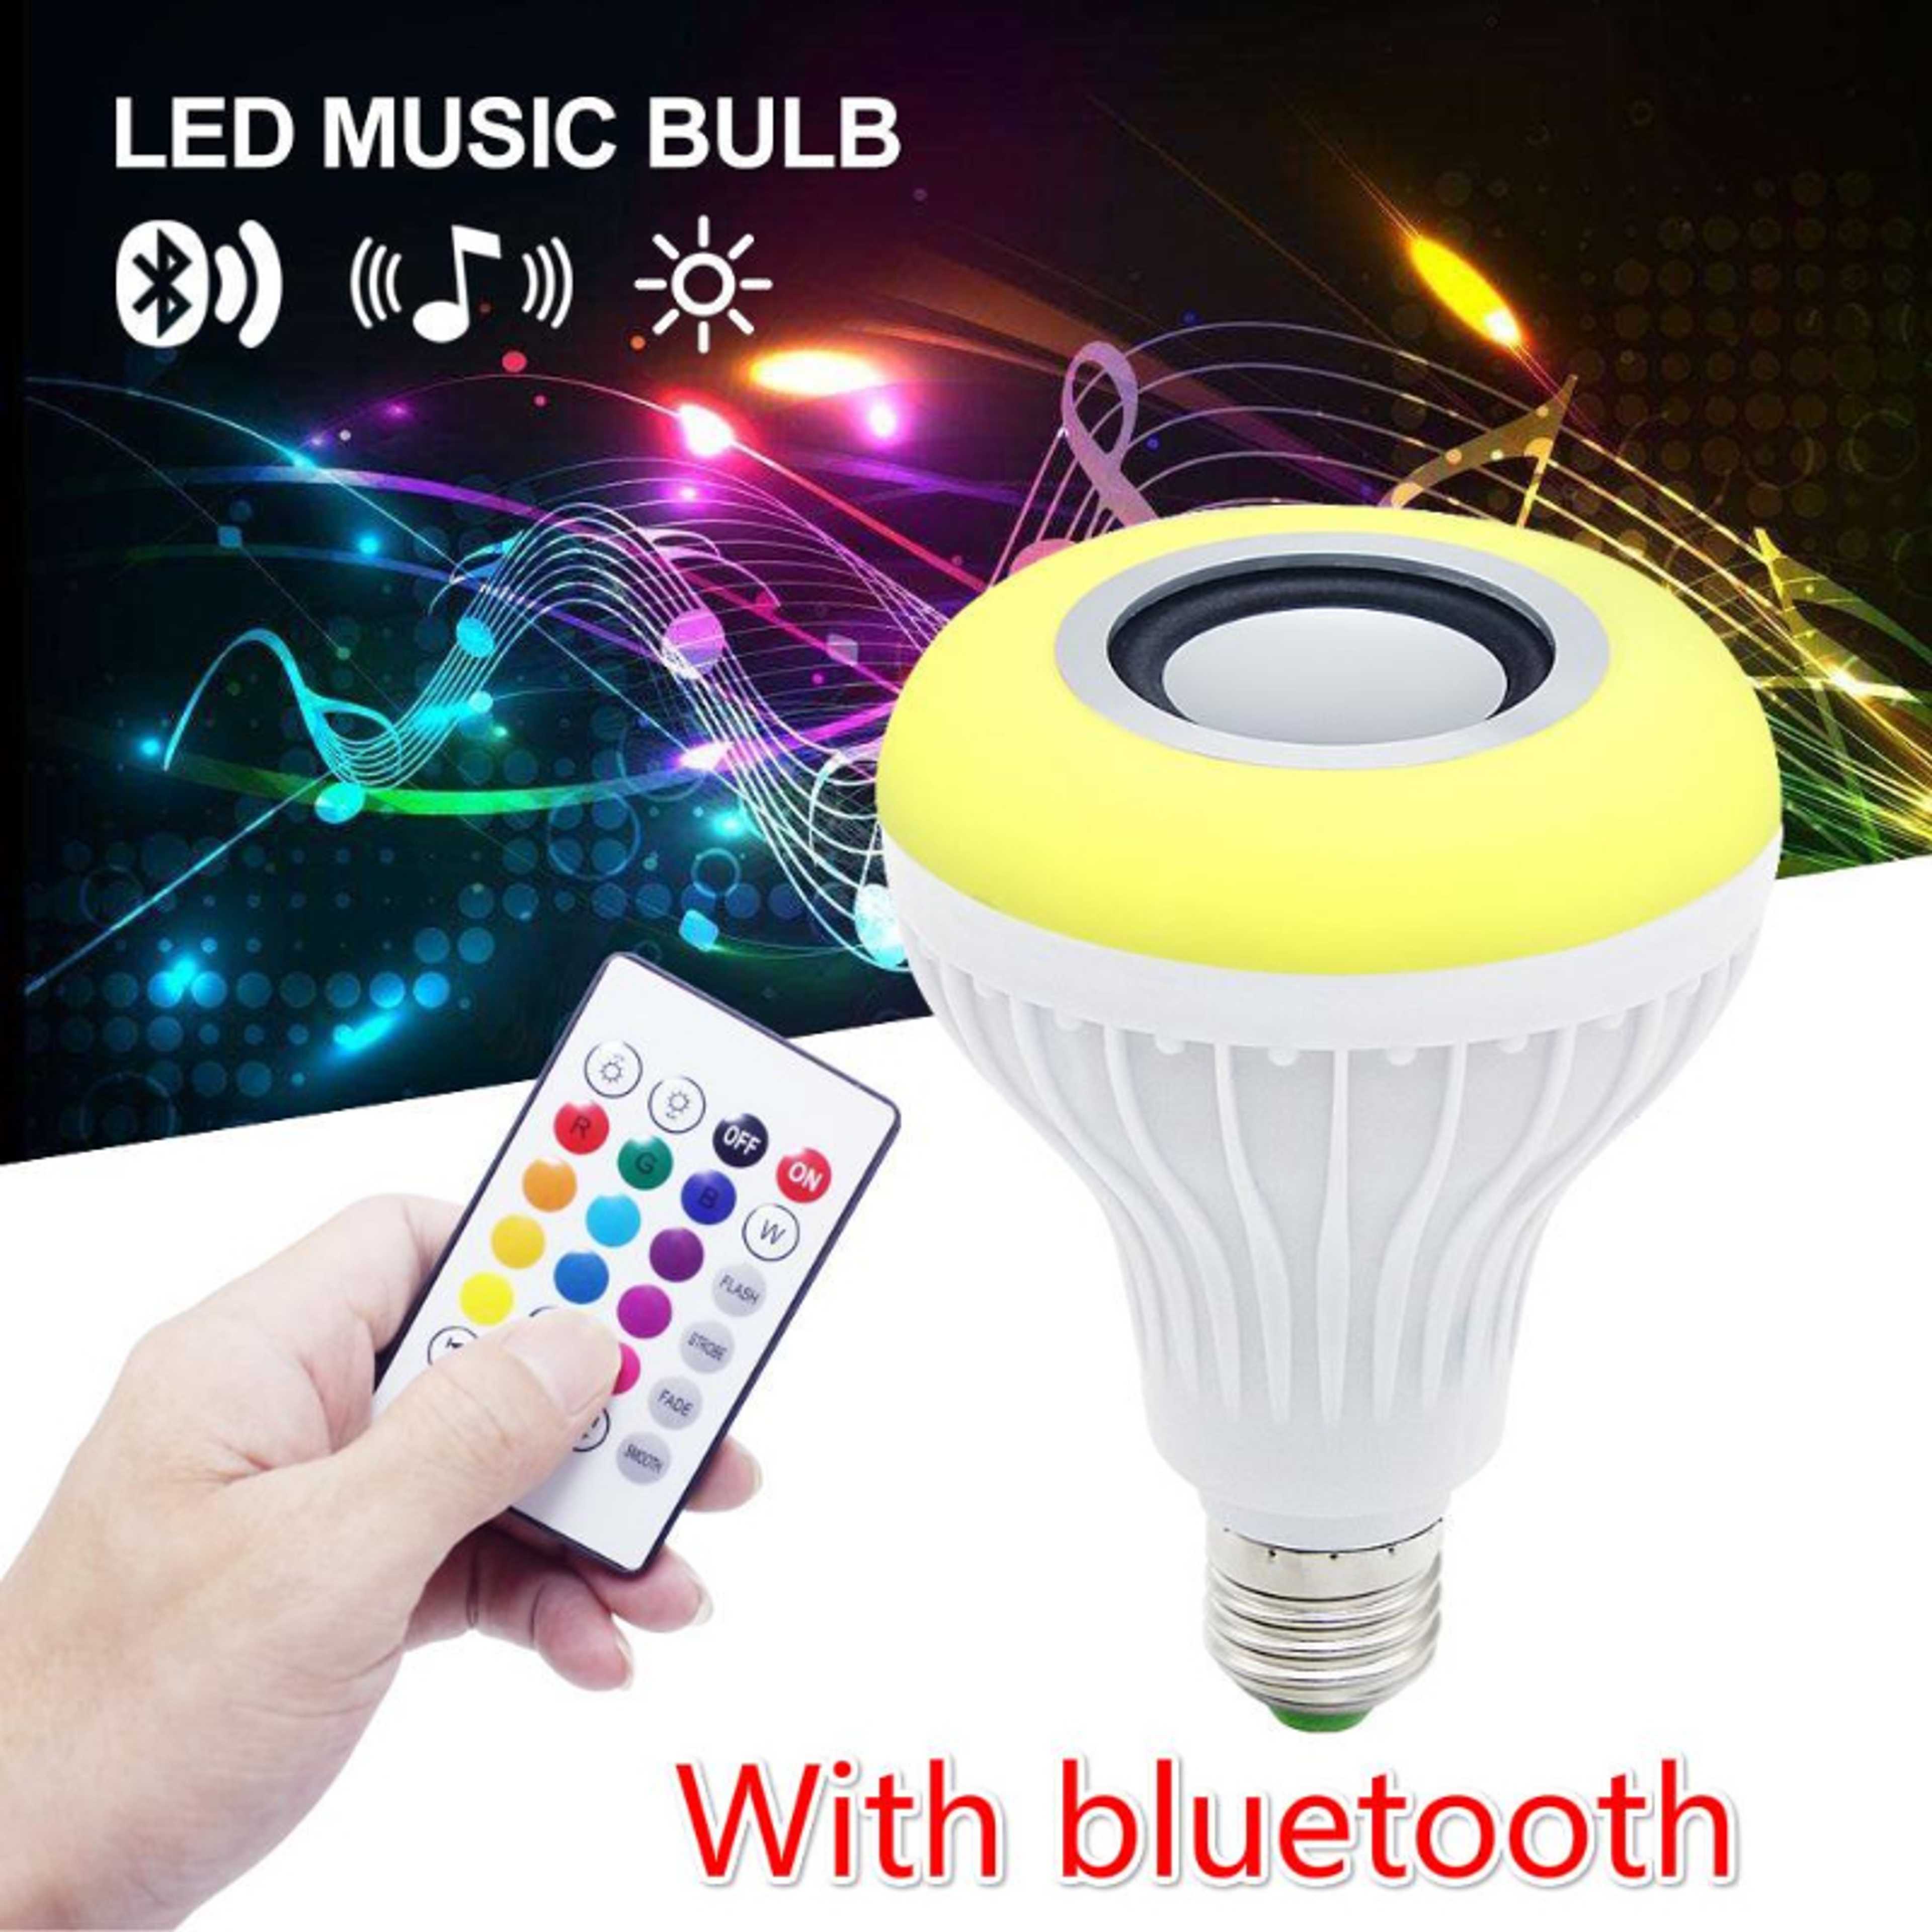 E27 Smart RGB Wireless Bluetooth Speaker Music LED Bulb with the remote control